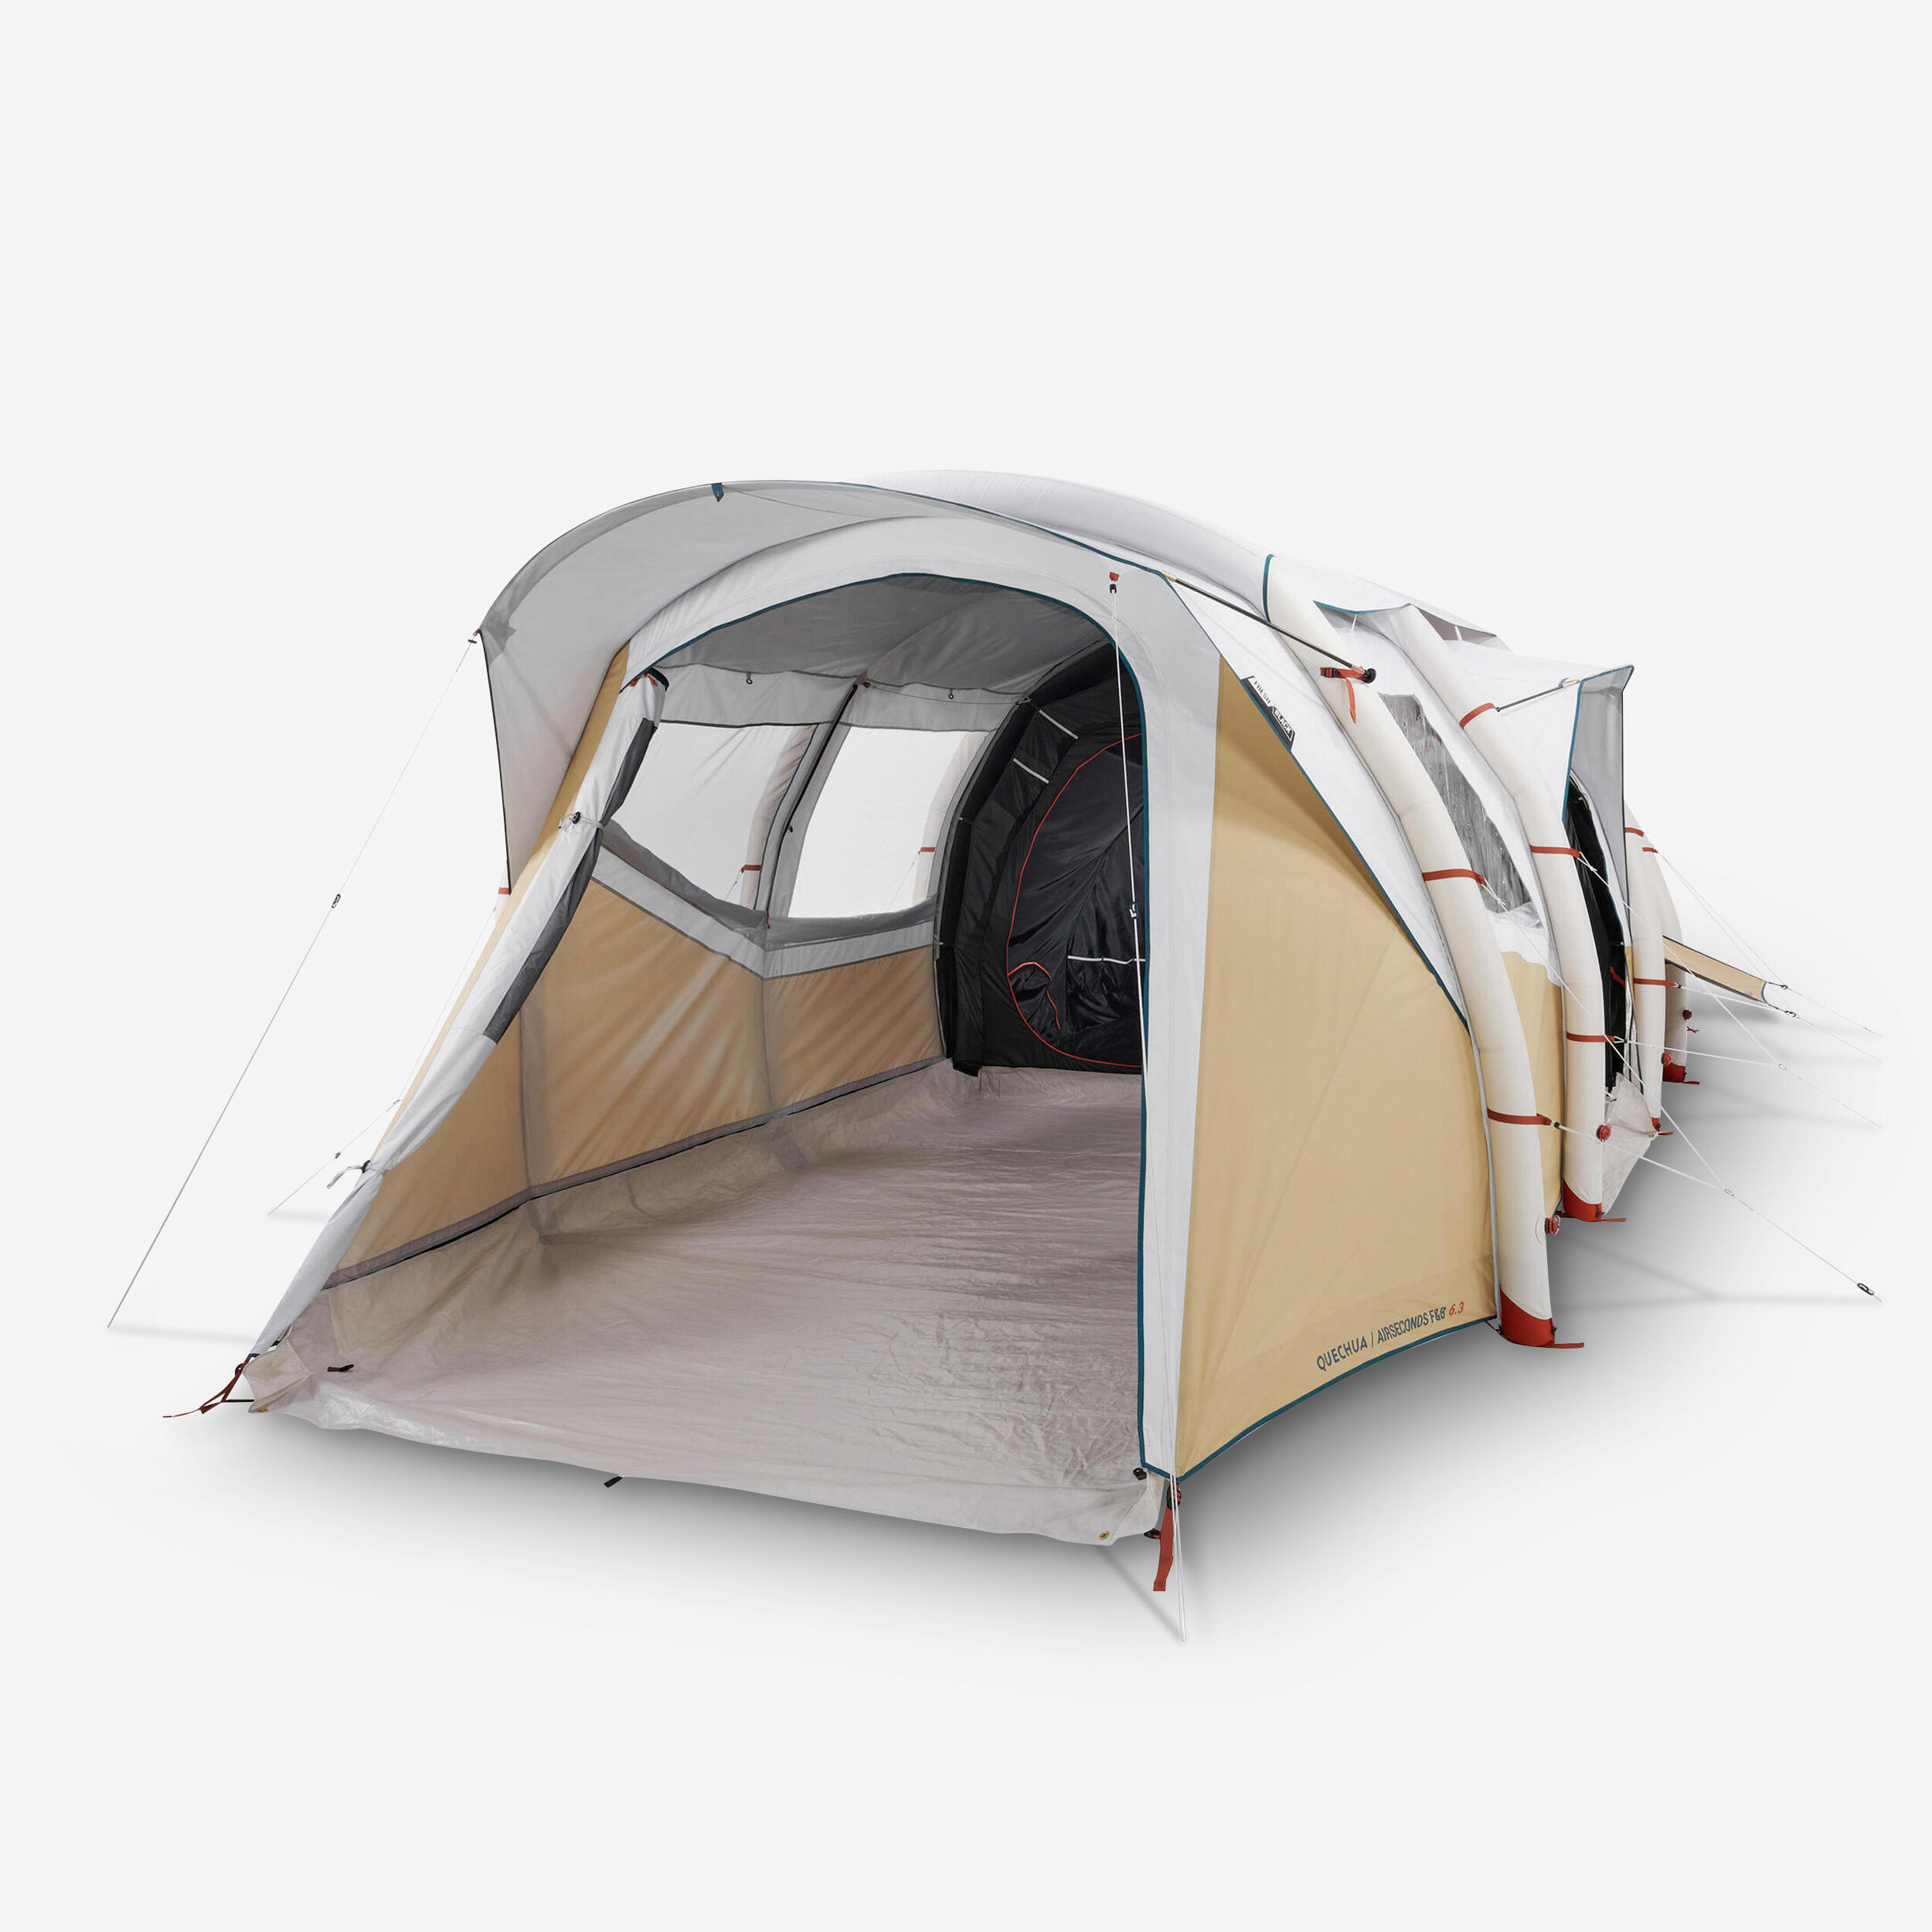 Camping 6-Person Tent – Air Seconds 6.3